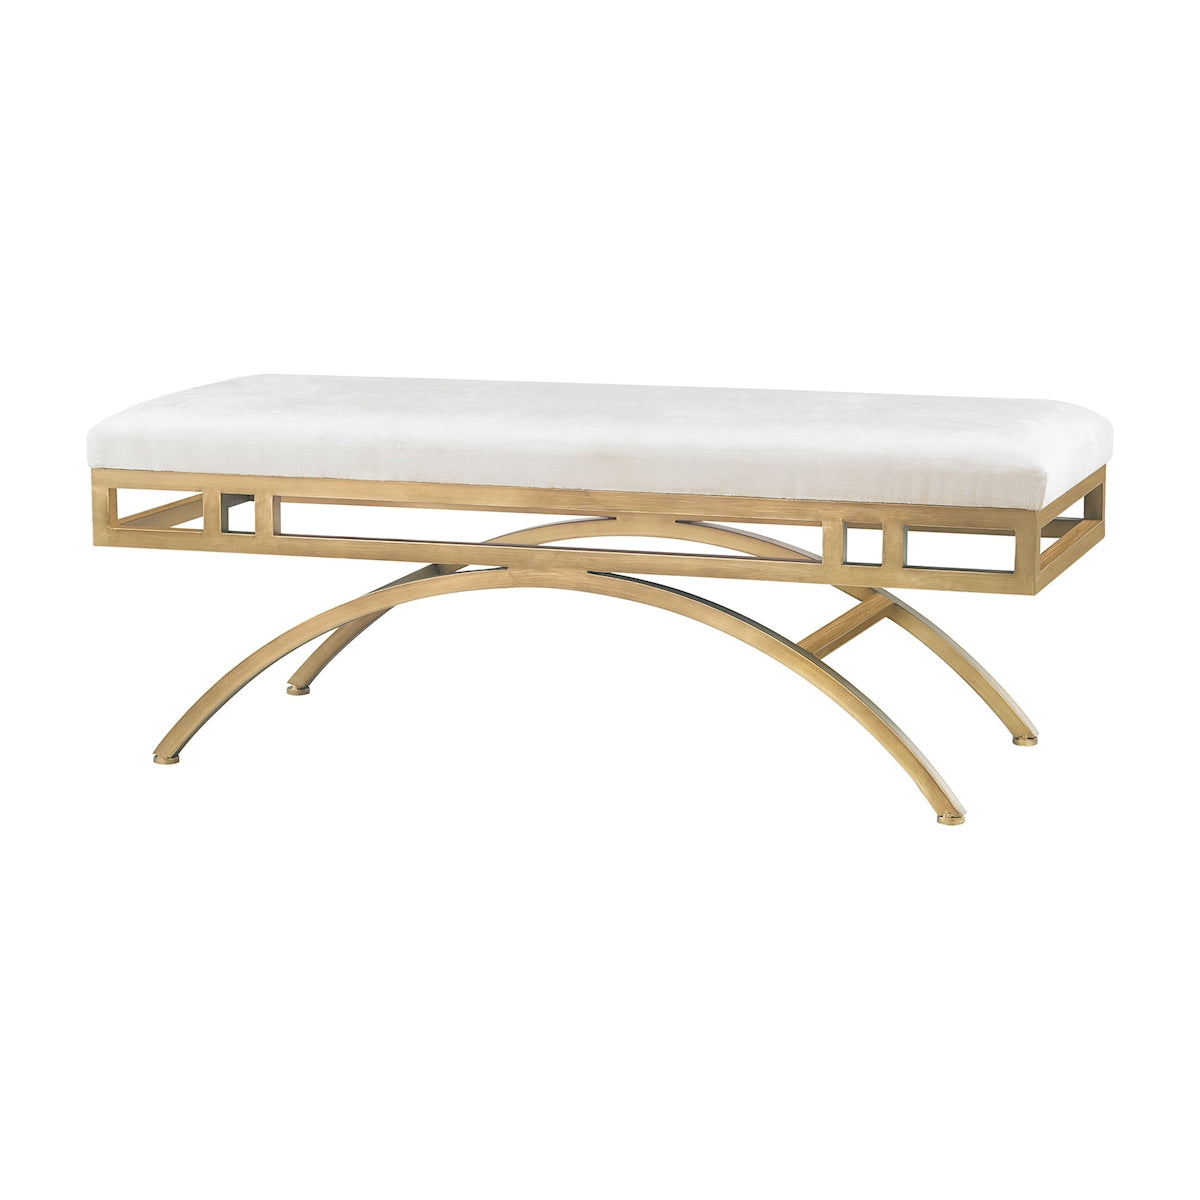 ELK Home - 3169-034 - Bench - Miracle Mile - White